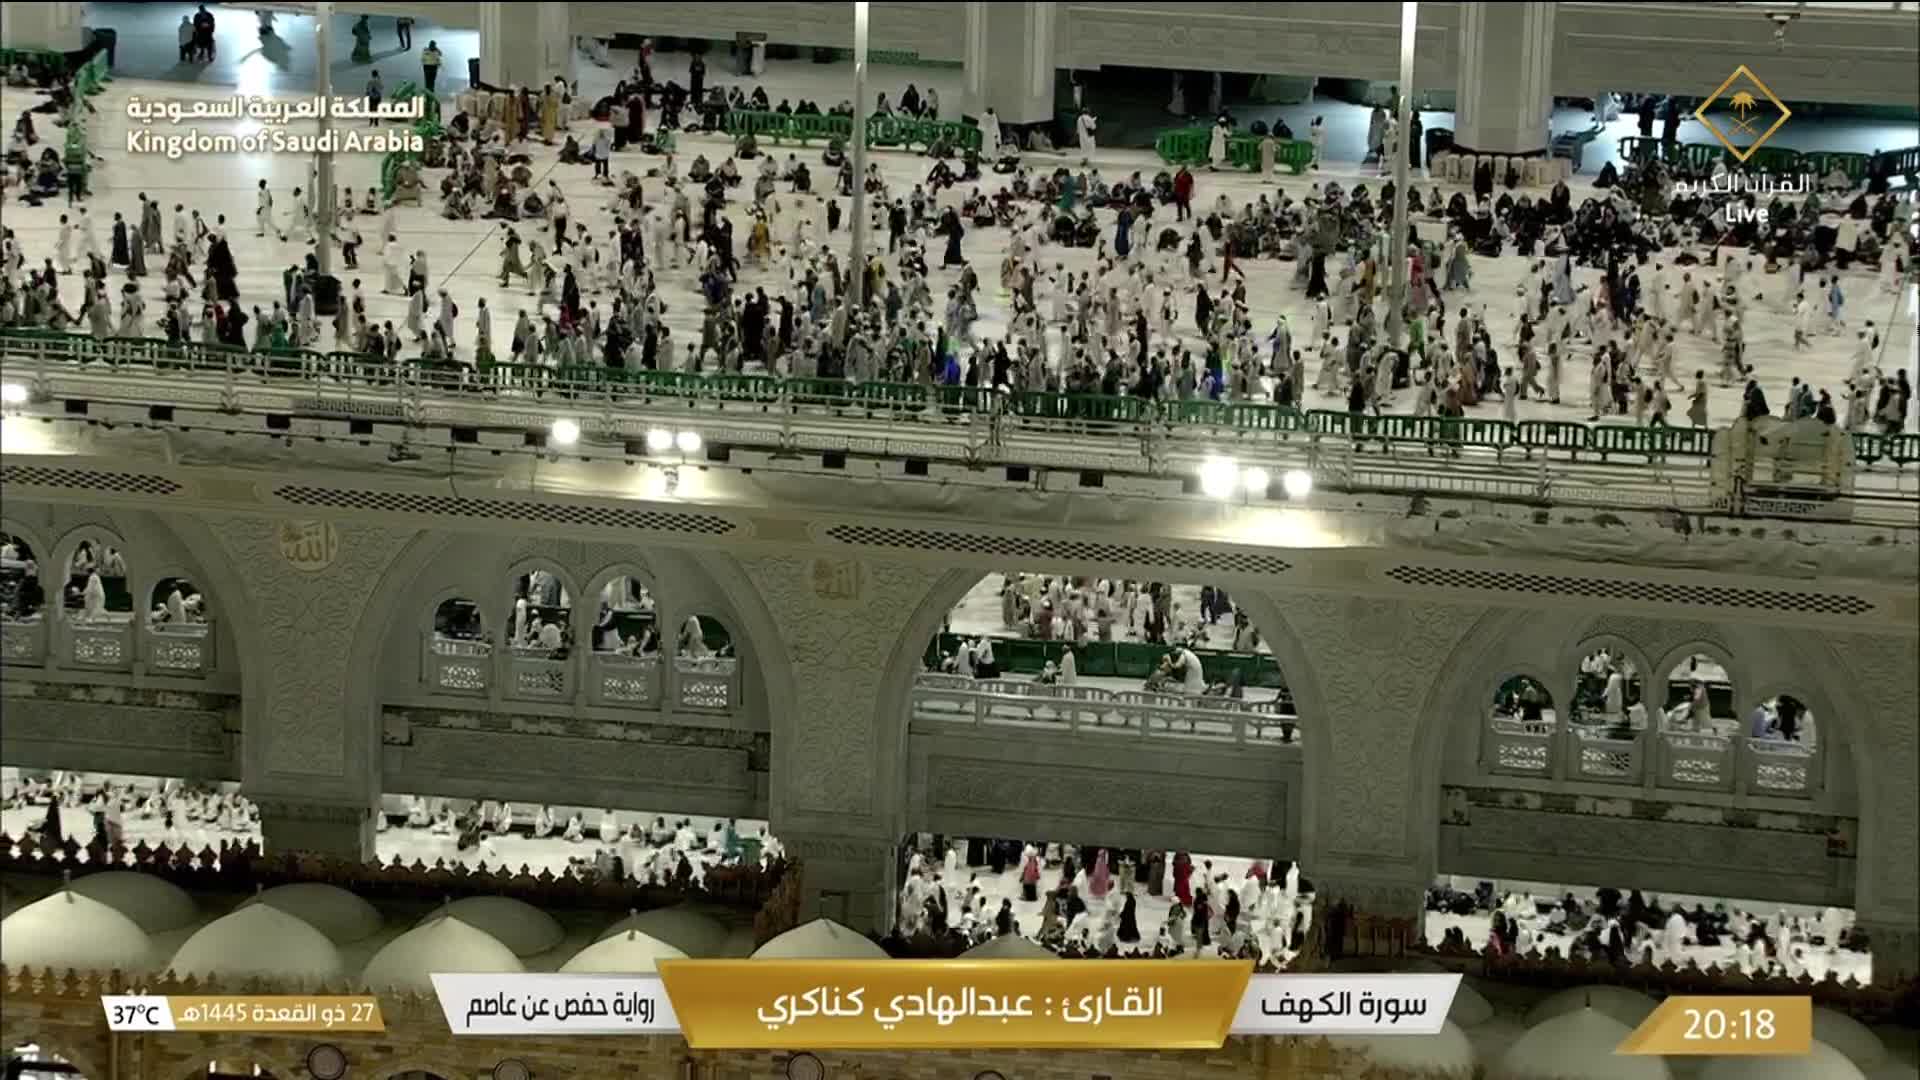 Mecca Wed. 20:36